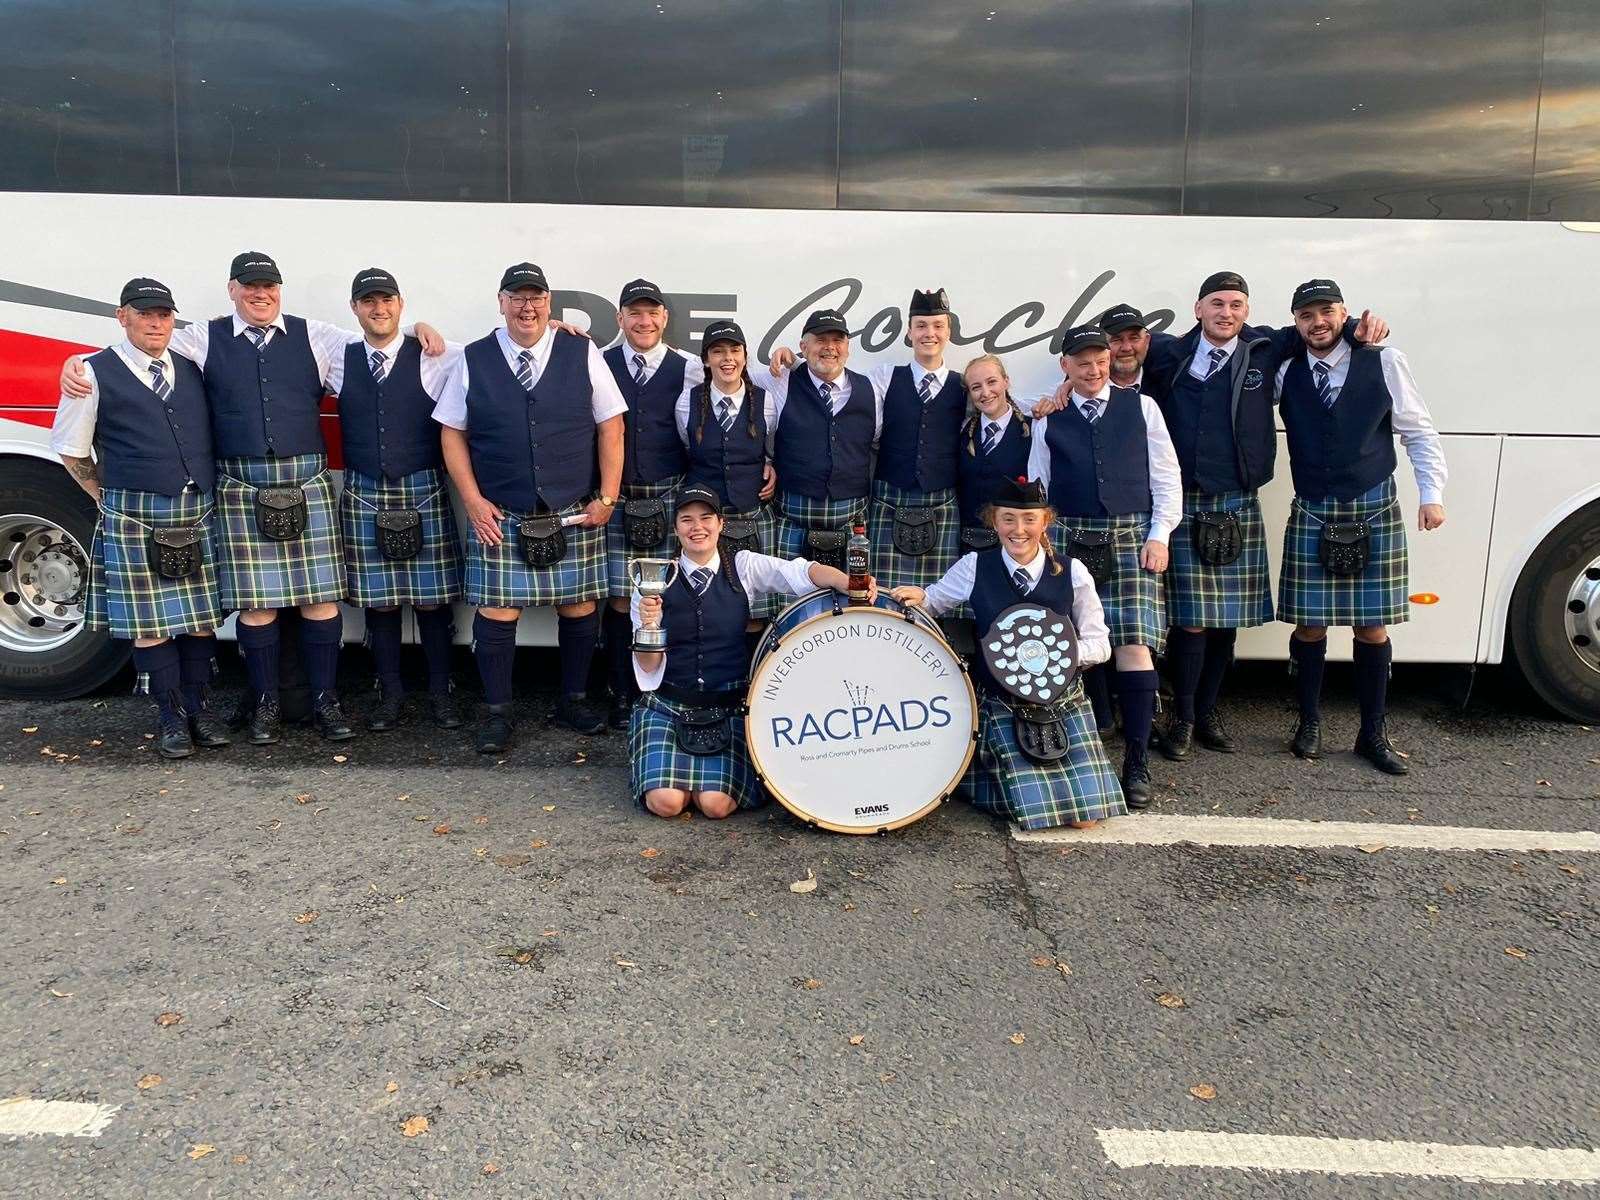 Ross and Cromarty Pipe and Drums band pose at the World Championships in Glasgow.